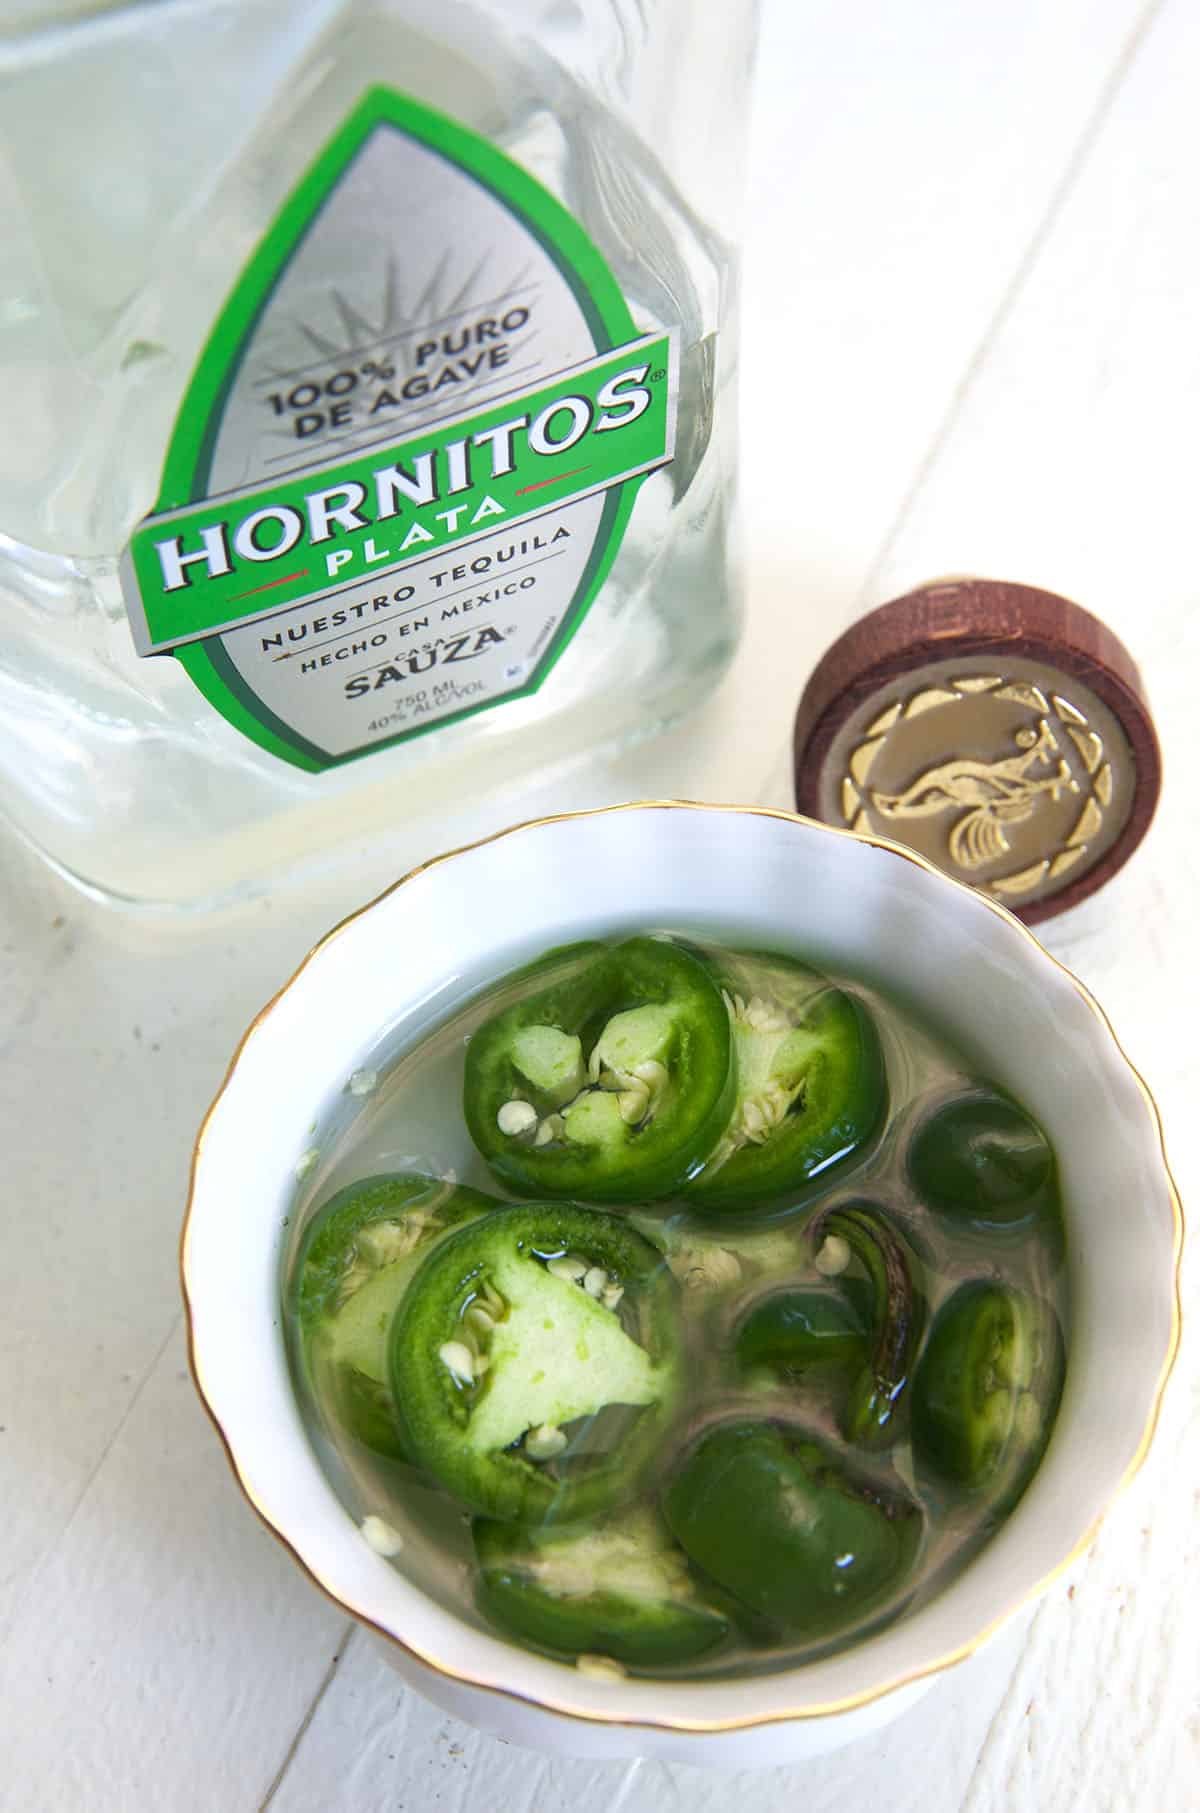 Jalapenos and tequila are placed next to each other on a white surface.